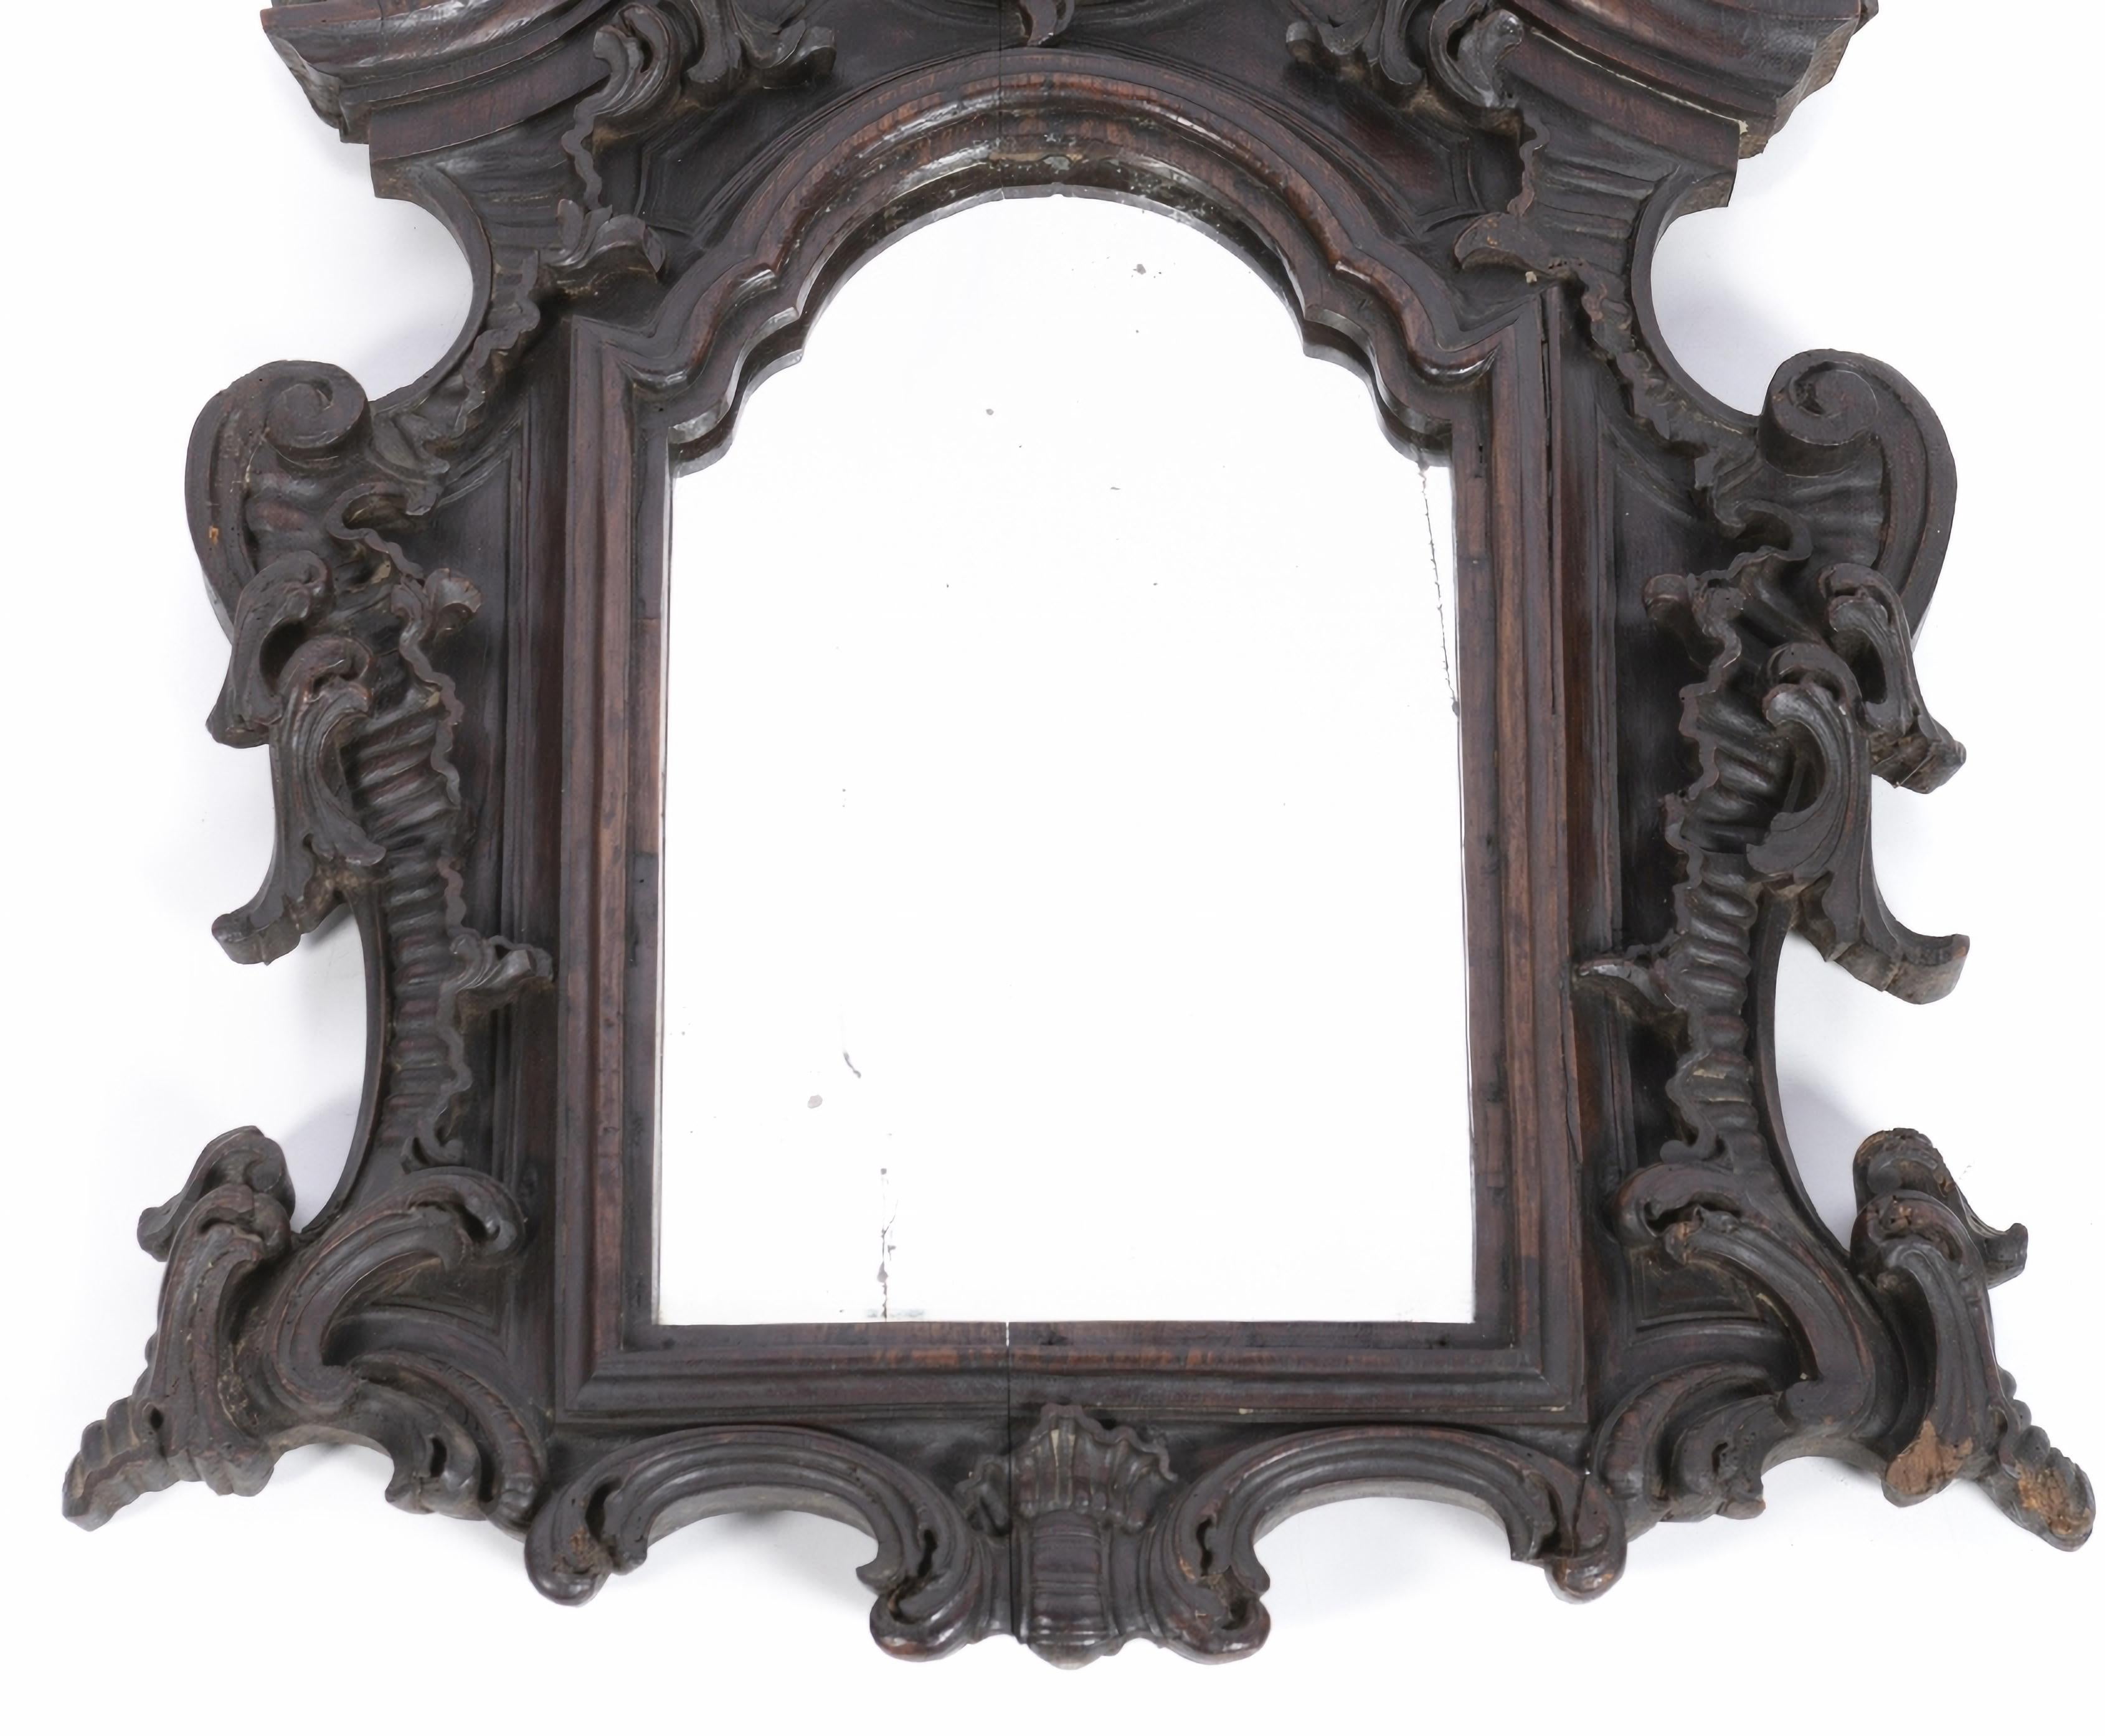 Wall mirror
18th century Portuguese, frame in chestnut wood with carvings.
Small defects.
Dimension: 103 x 67 cm.
Good condition.
     